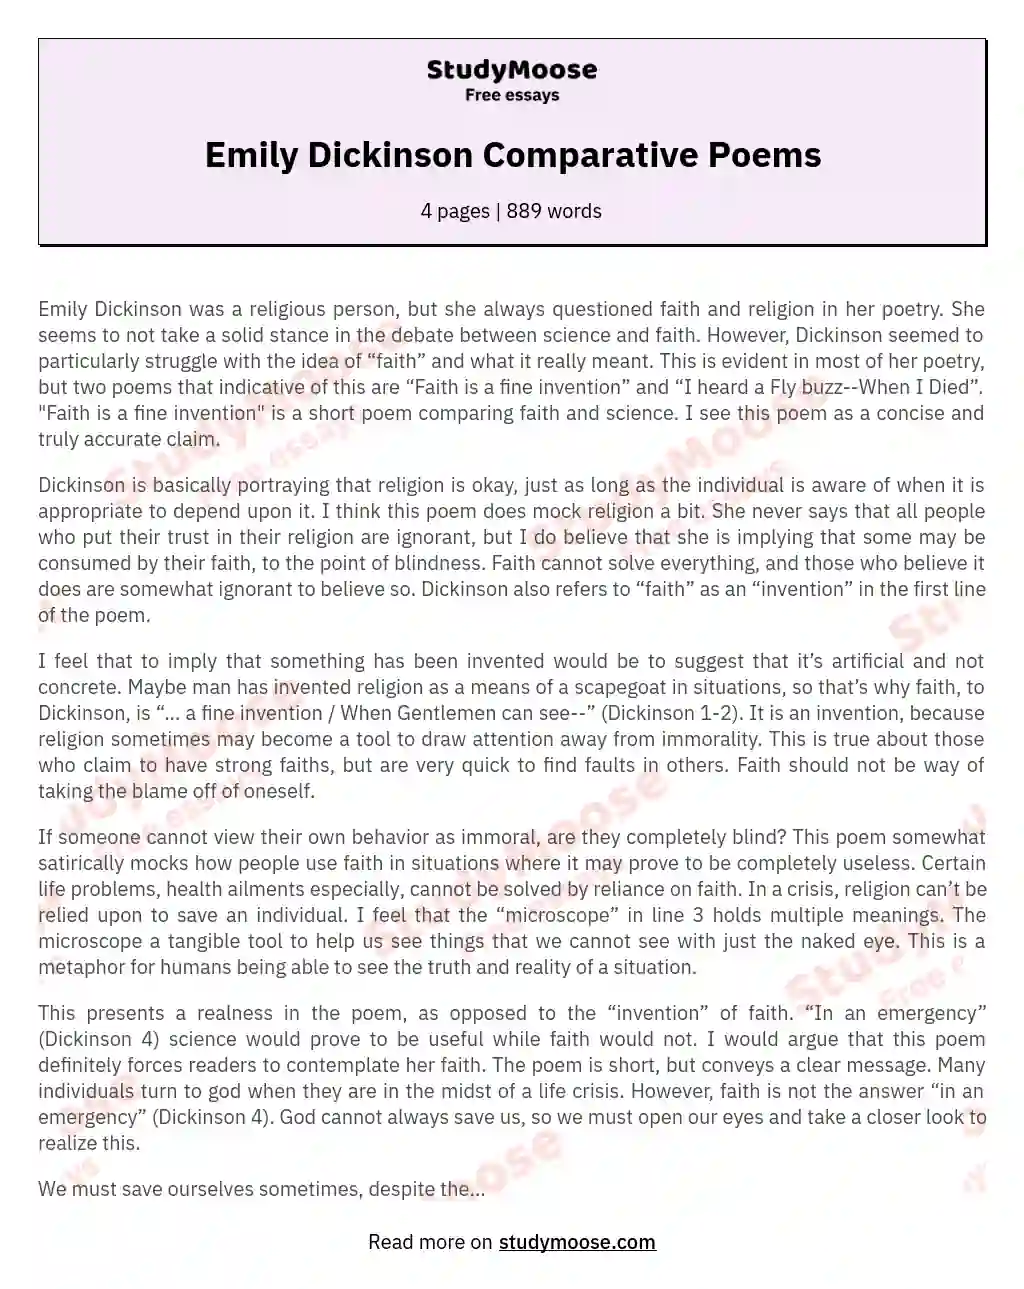 Emily Dickinson Comparative Poems